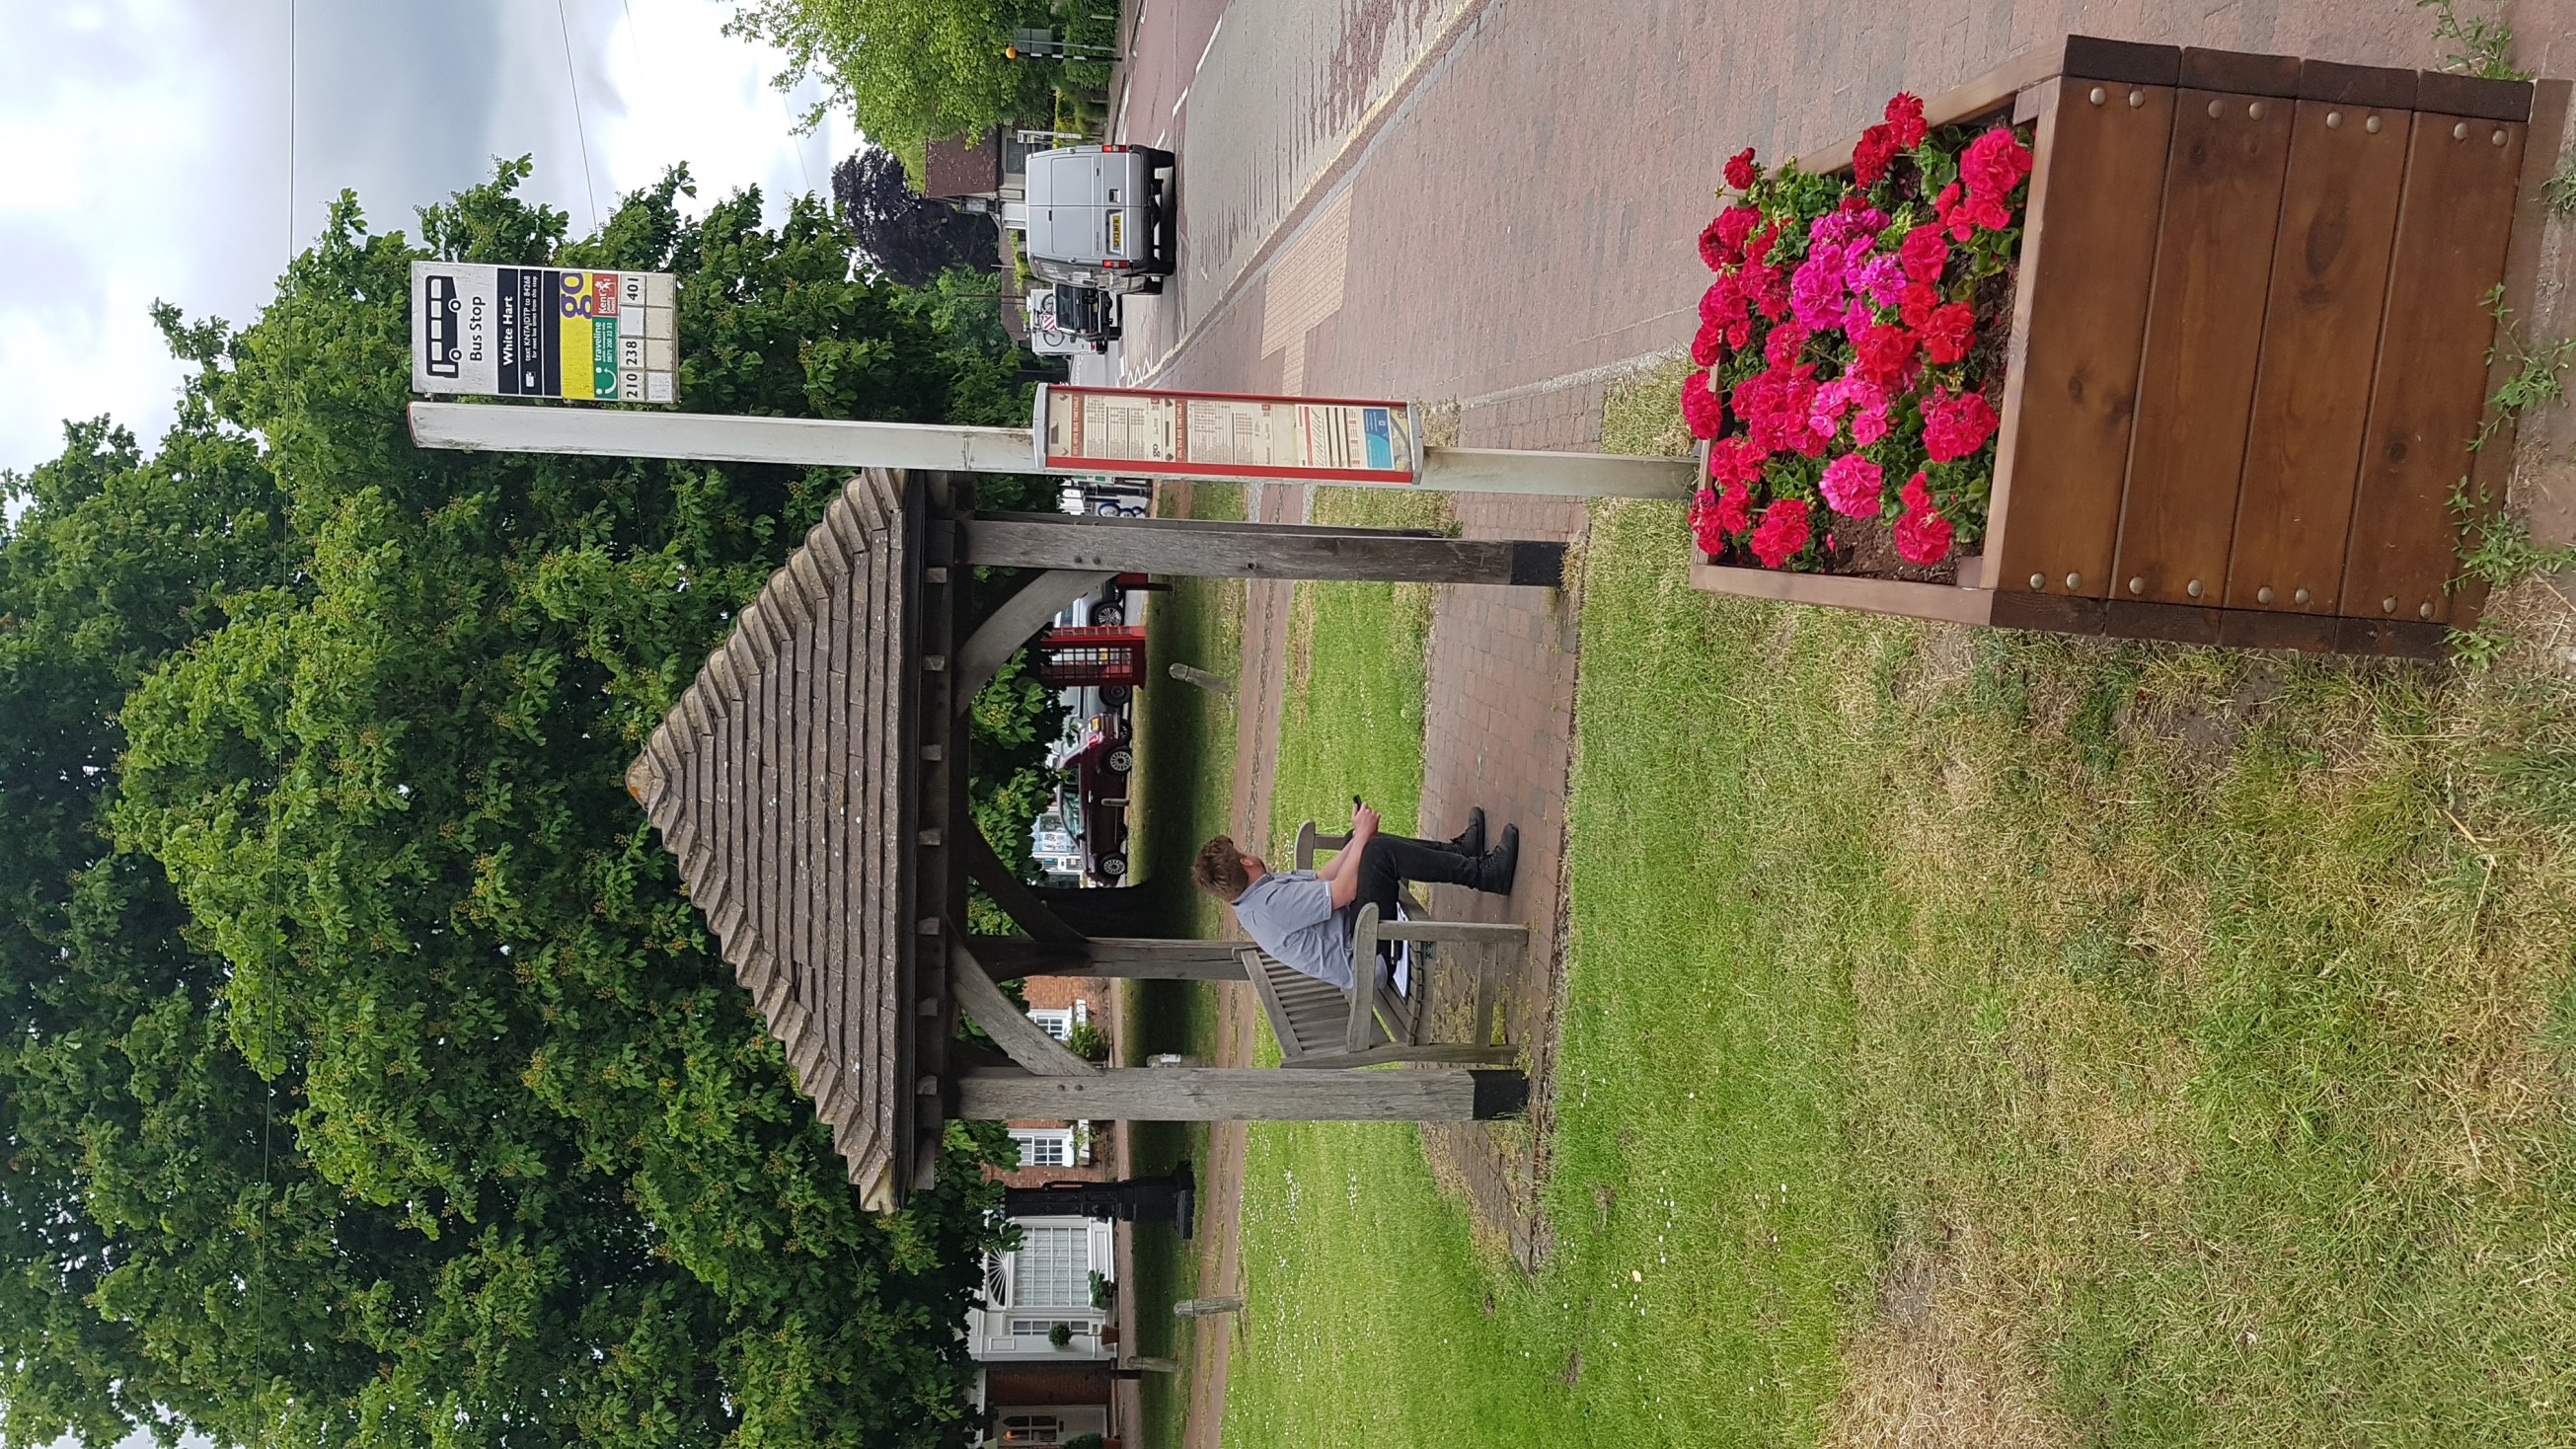 bus-shelter-on-green